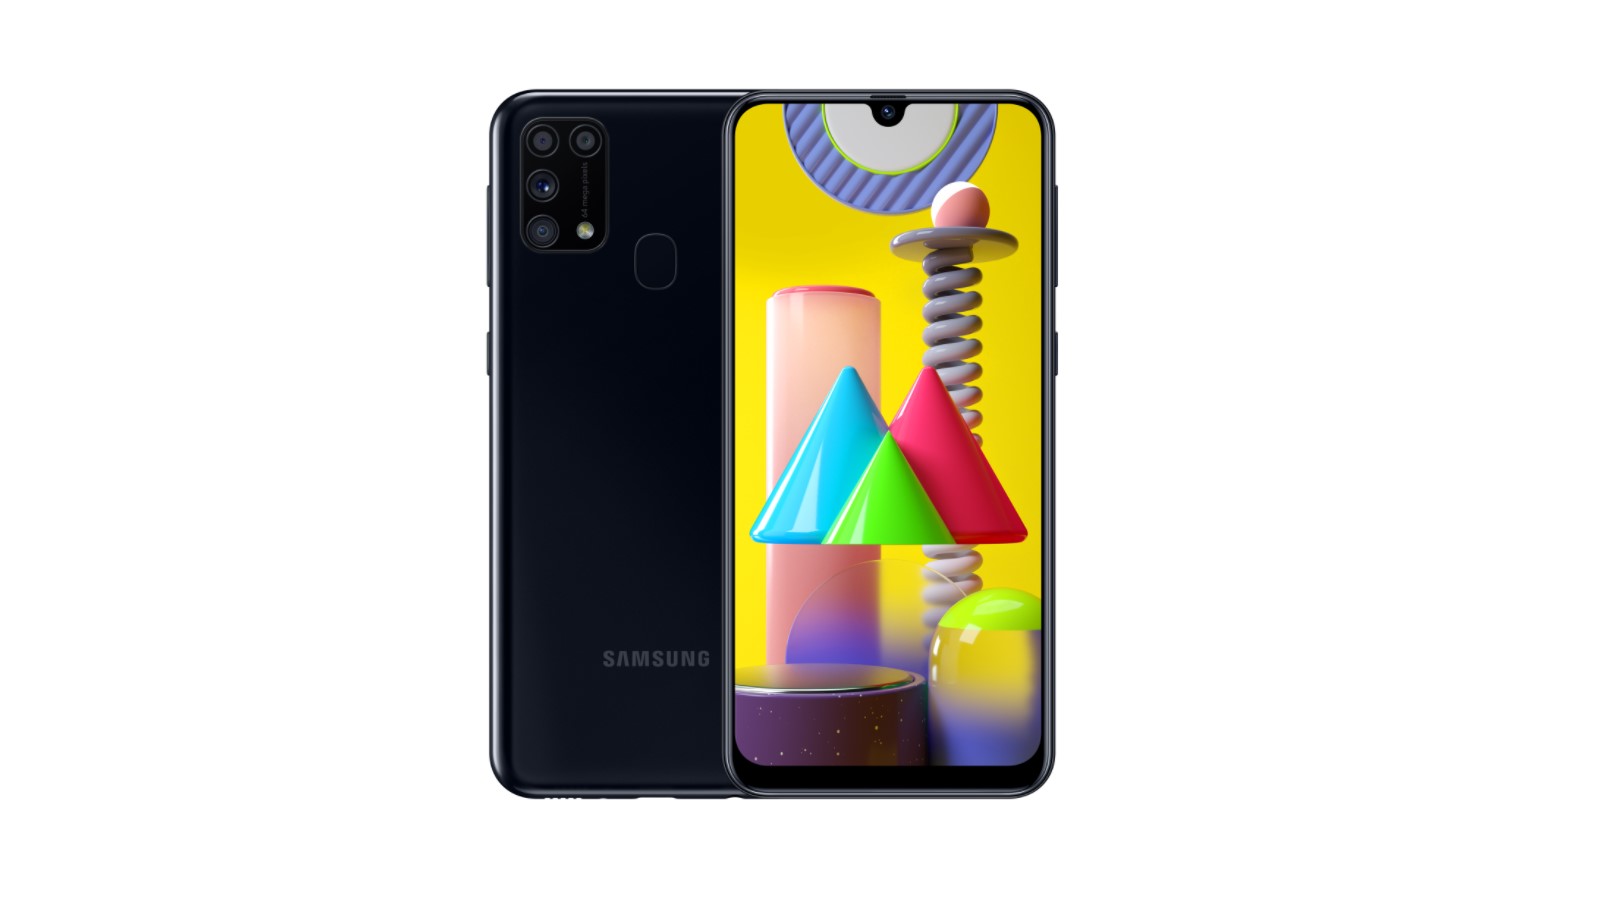 Samsung Galaxy M31 Android 11 released with One UI 3.0 beta program